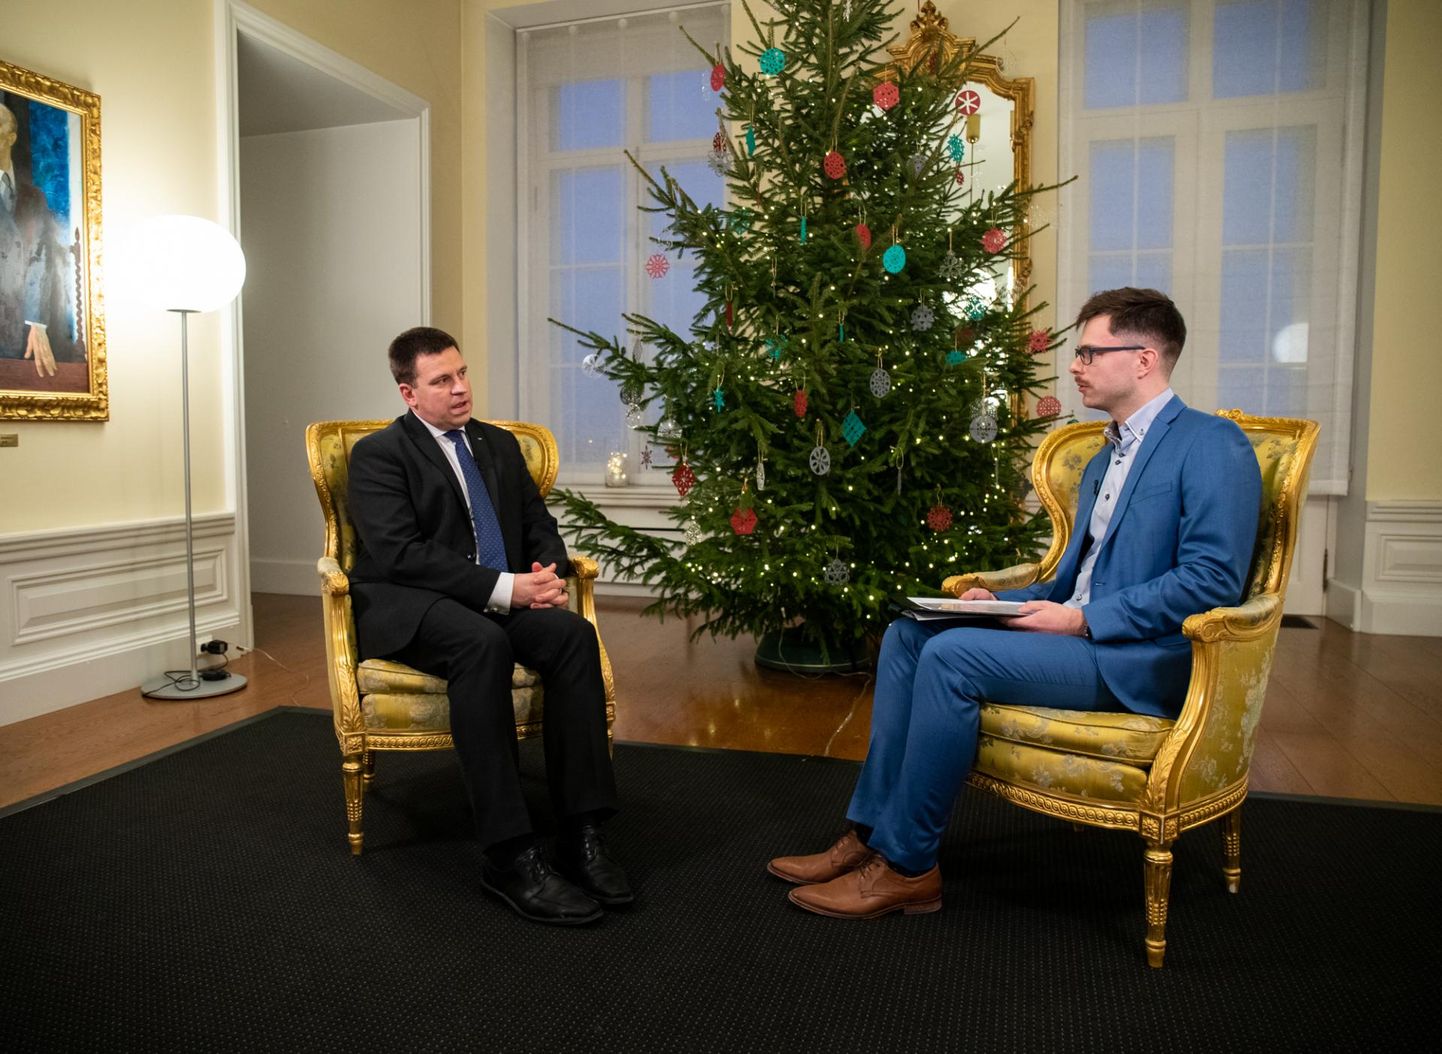 Prime Minister Jüri Ratas talks about economic growth and results of PISA tests that outweigh the government’s shortcomings in an end-of-year interview to Postimees.